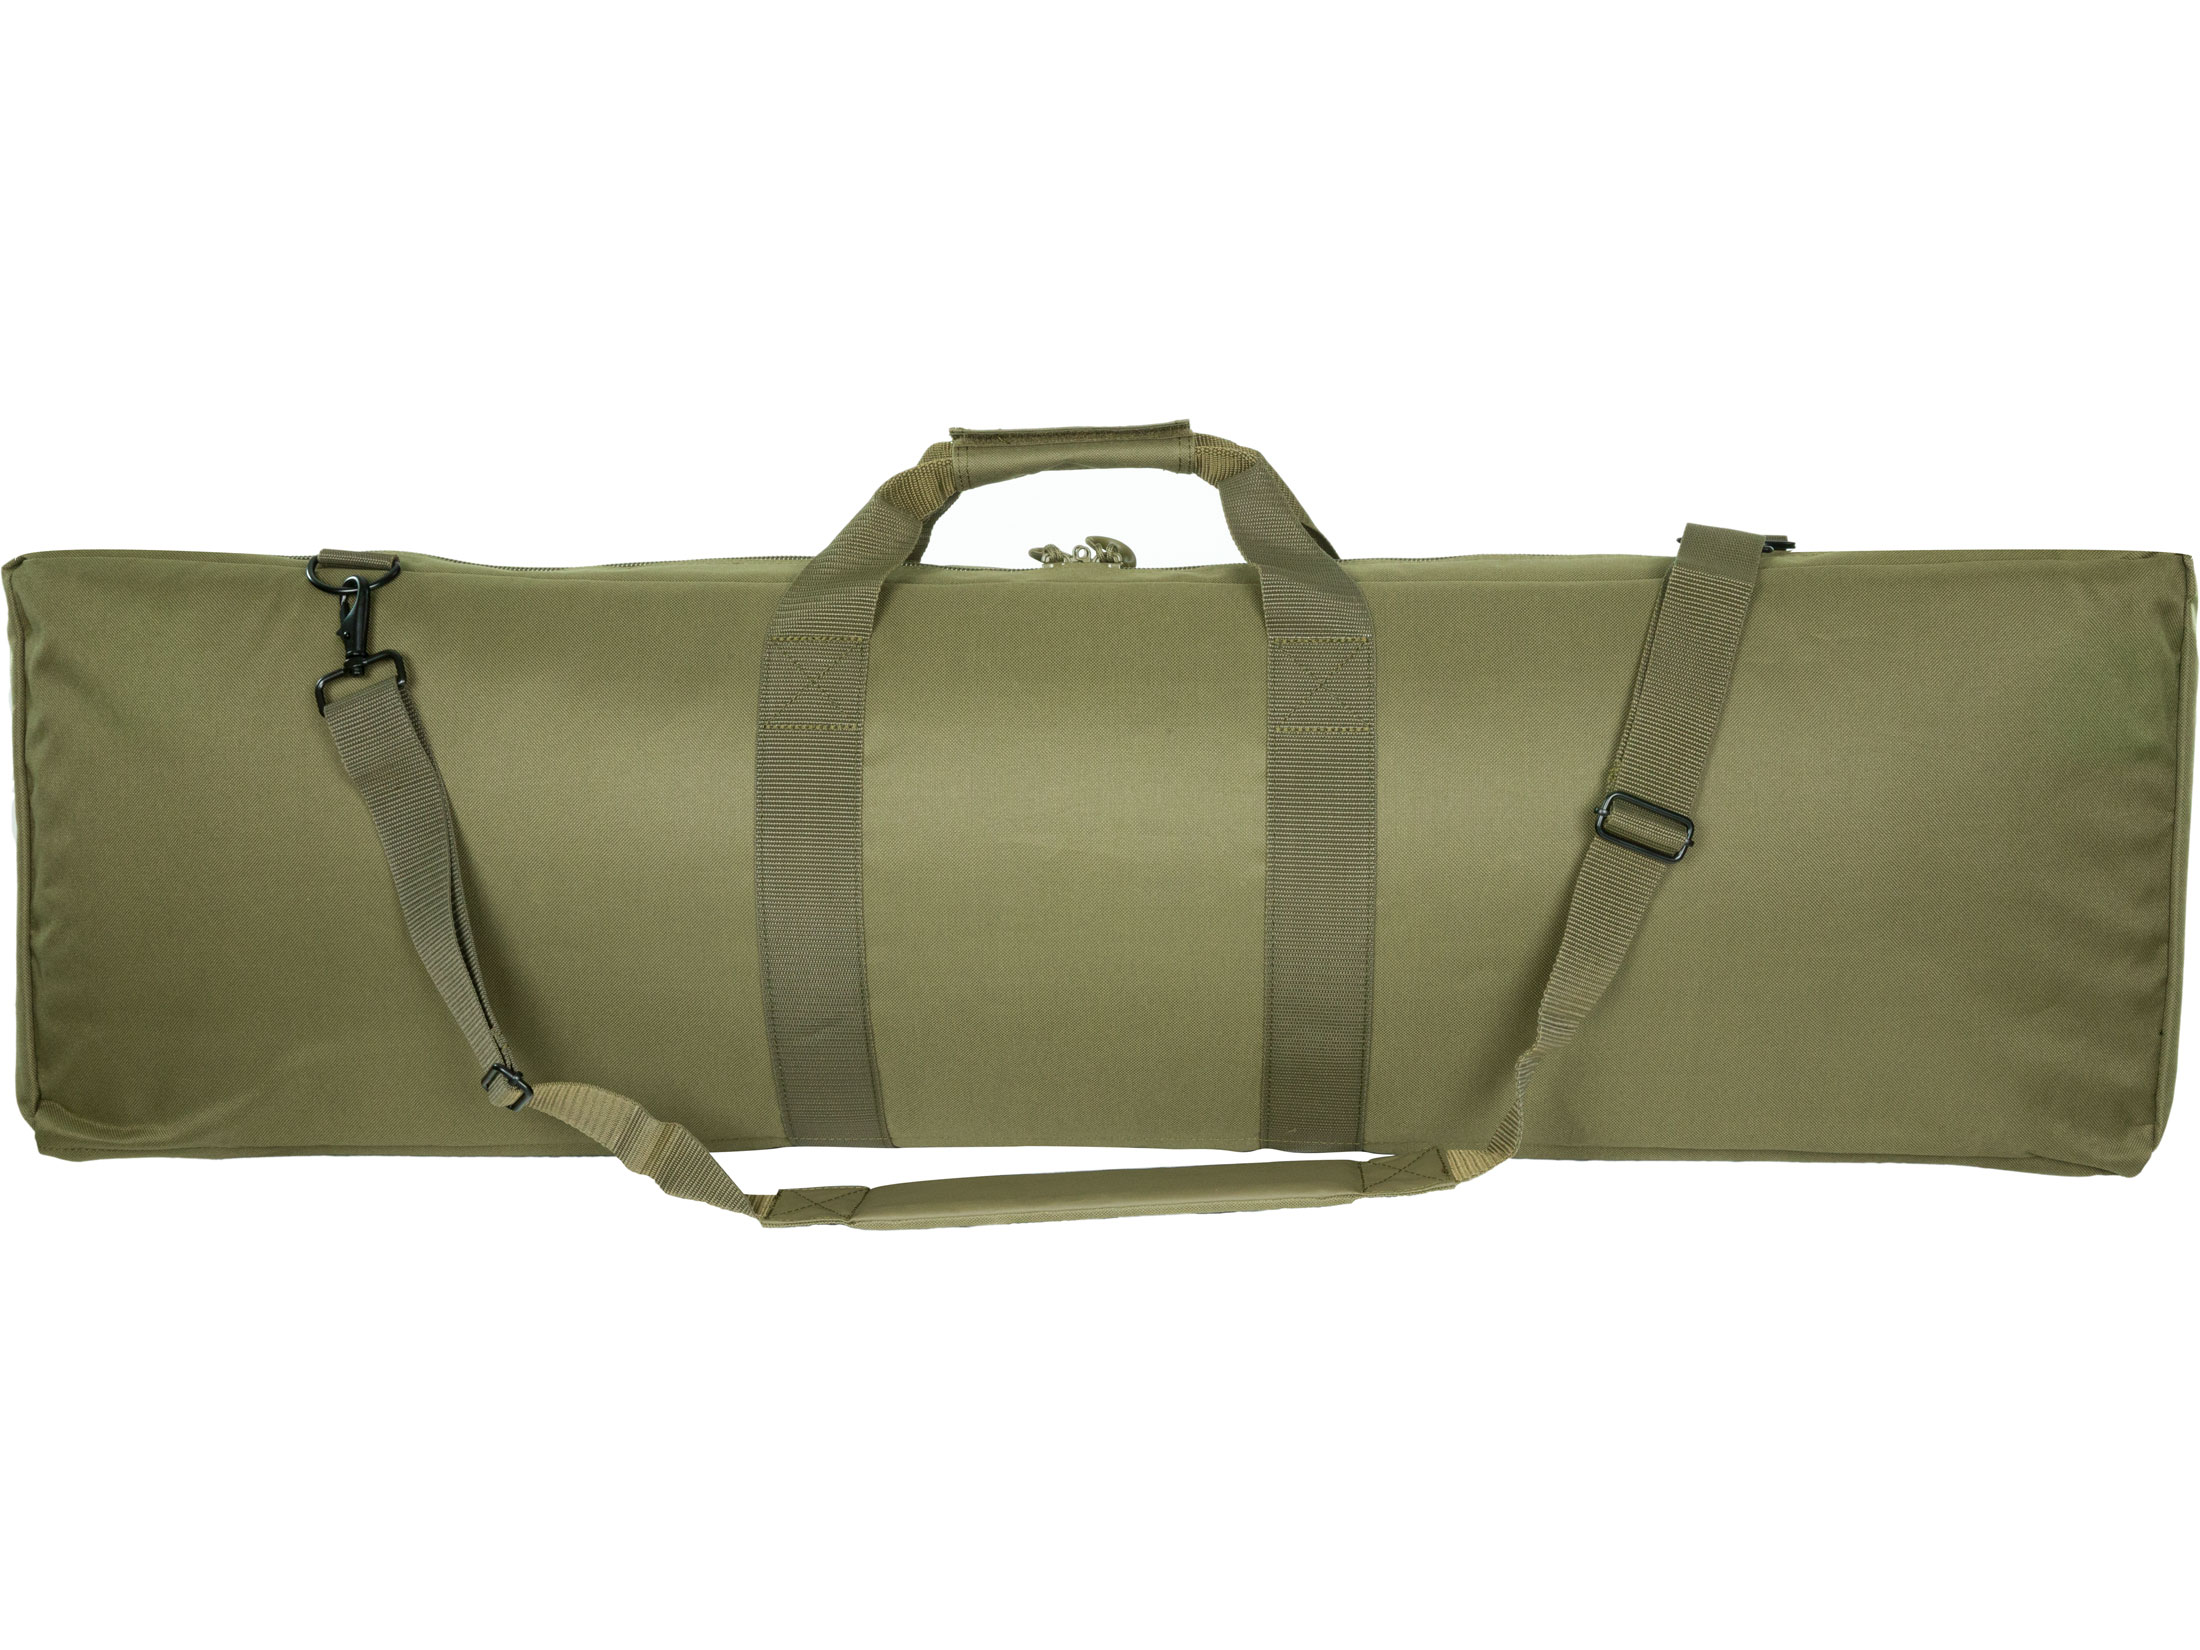 MidwayUSA Heavy Duty Double Tactical Rifle Case For Sale